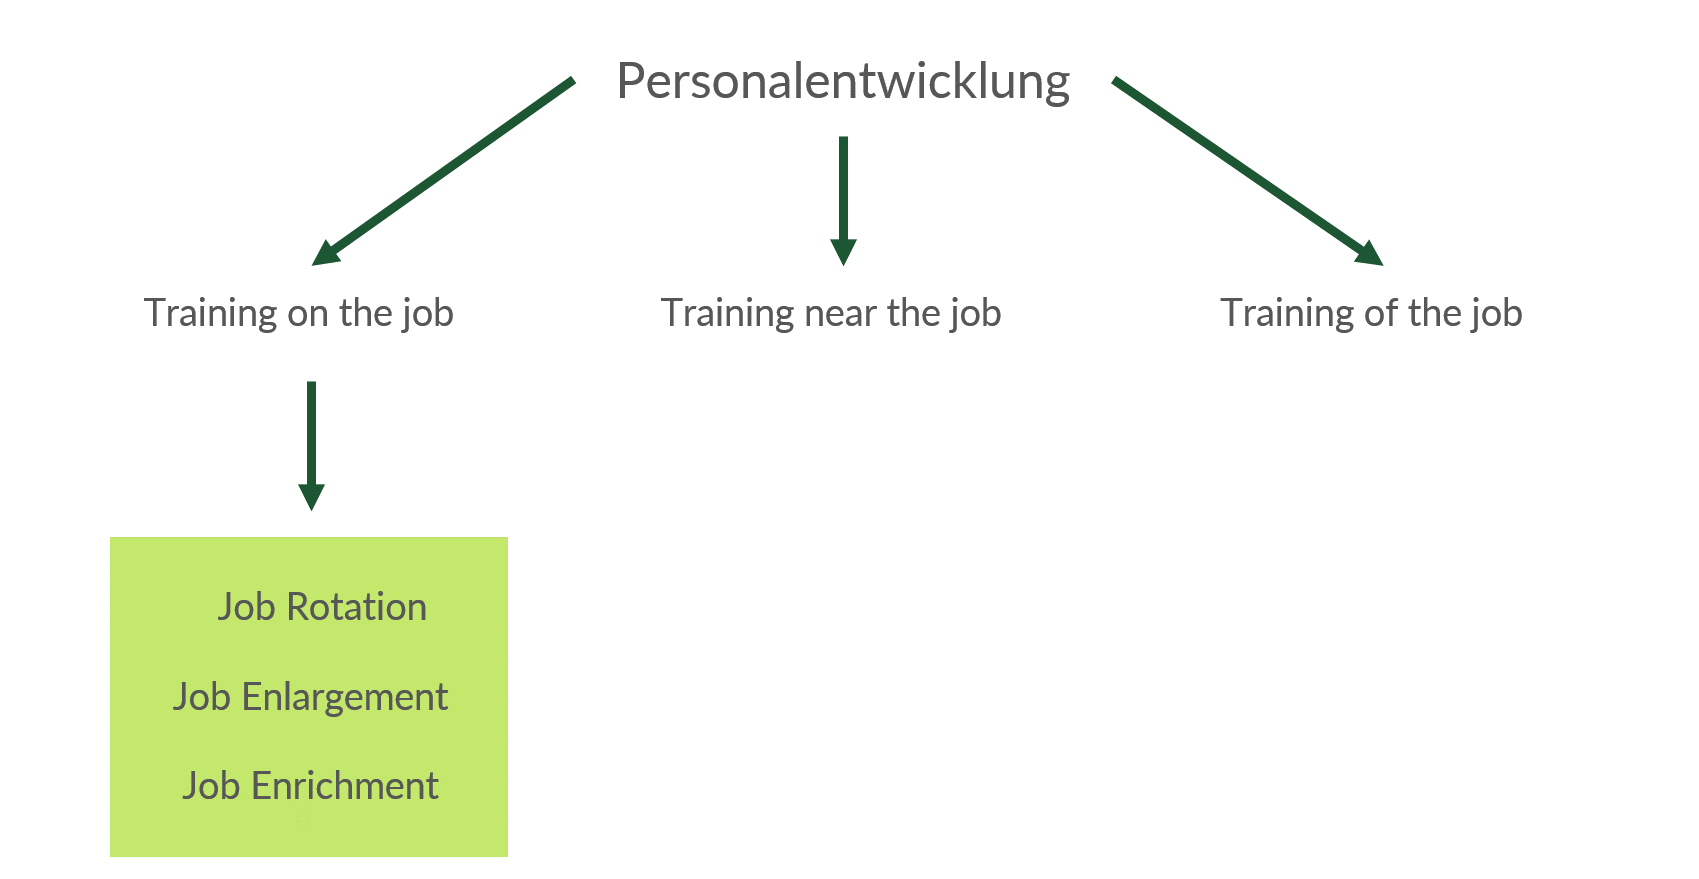 What Is the Meaning of Job Enrichment?